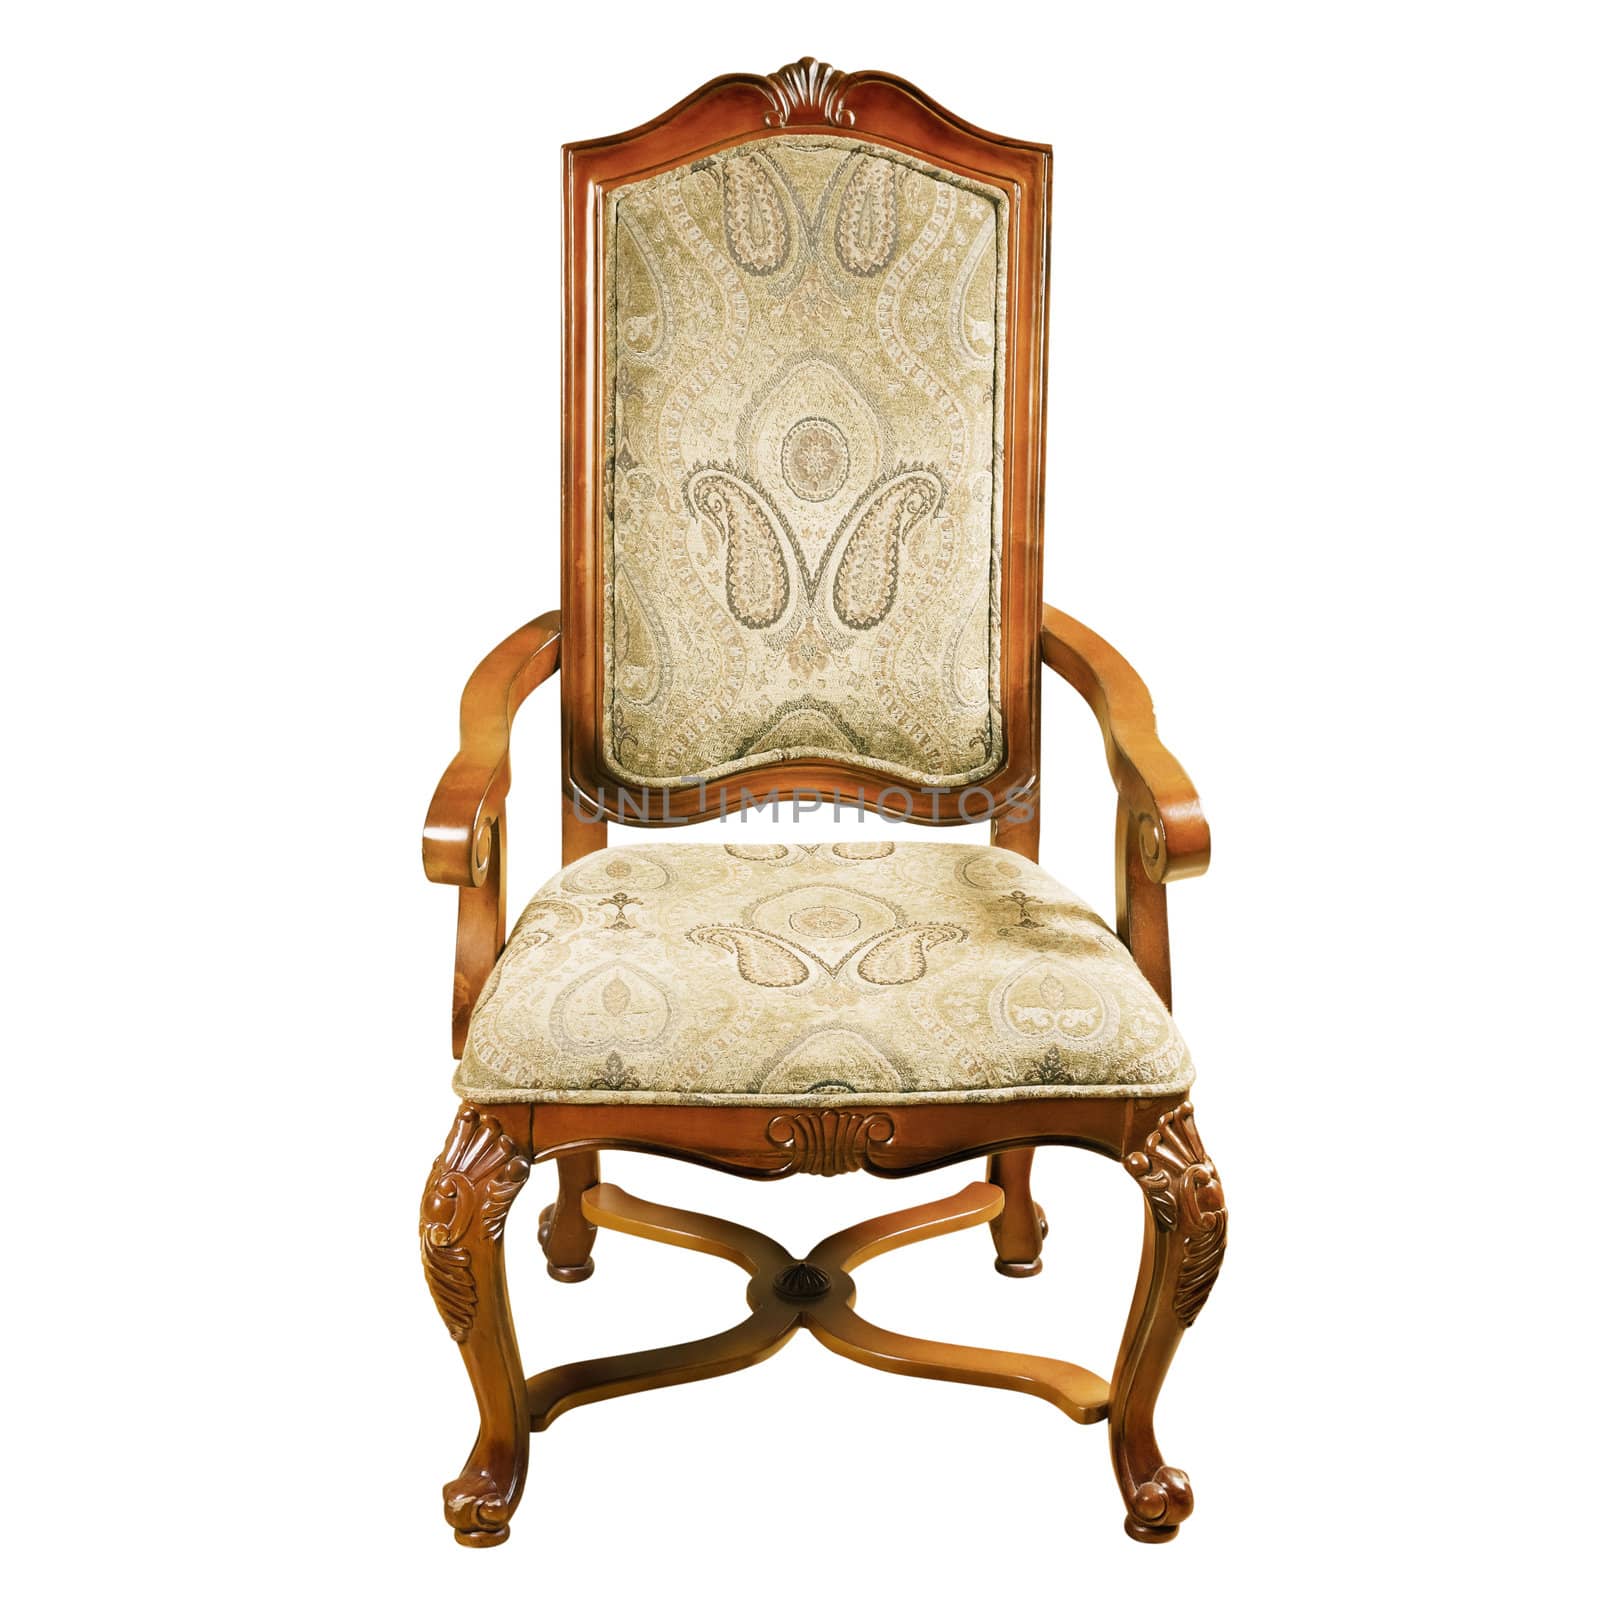 Old Antique Chair Over The White Background